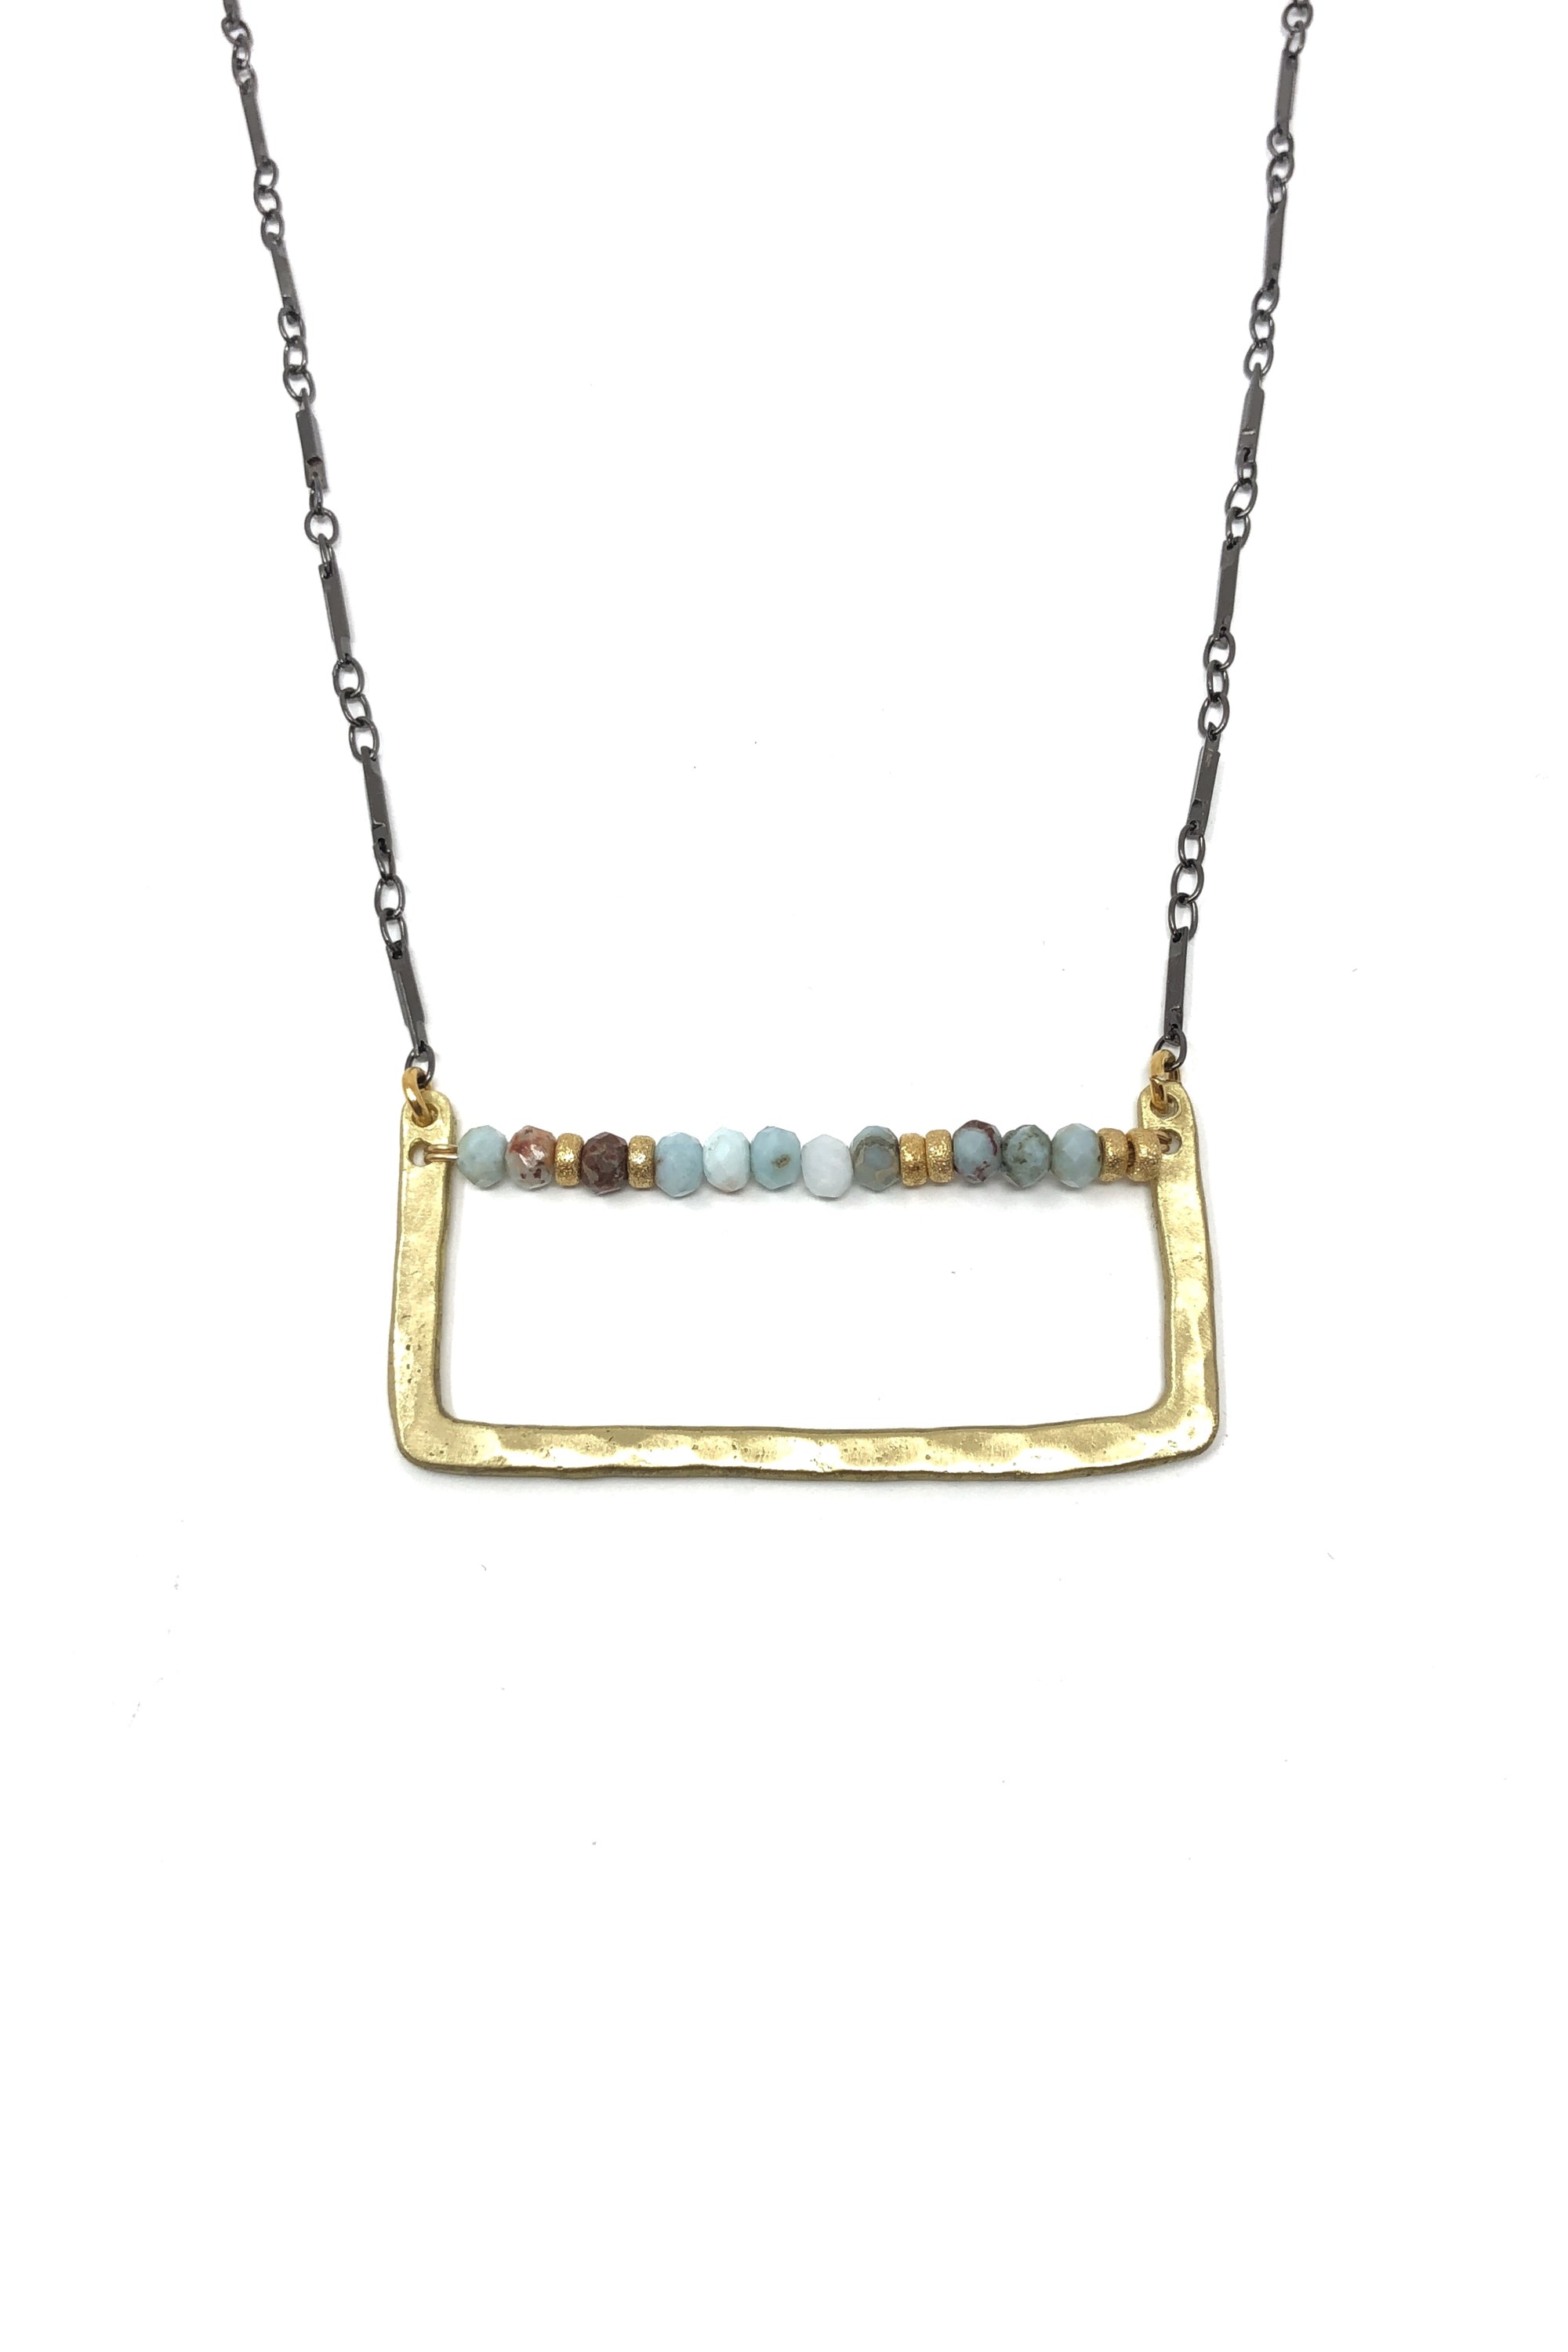 Hammered Gold and Larimar Necklace